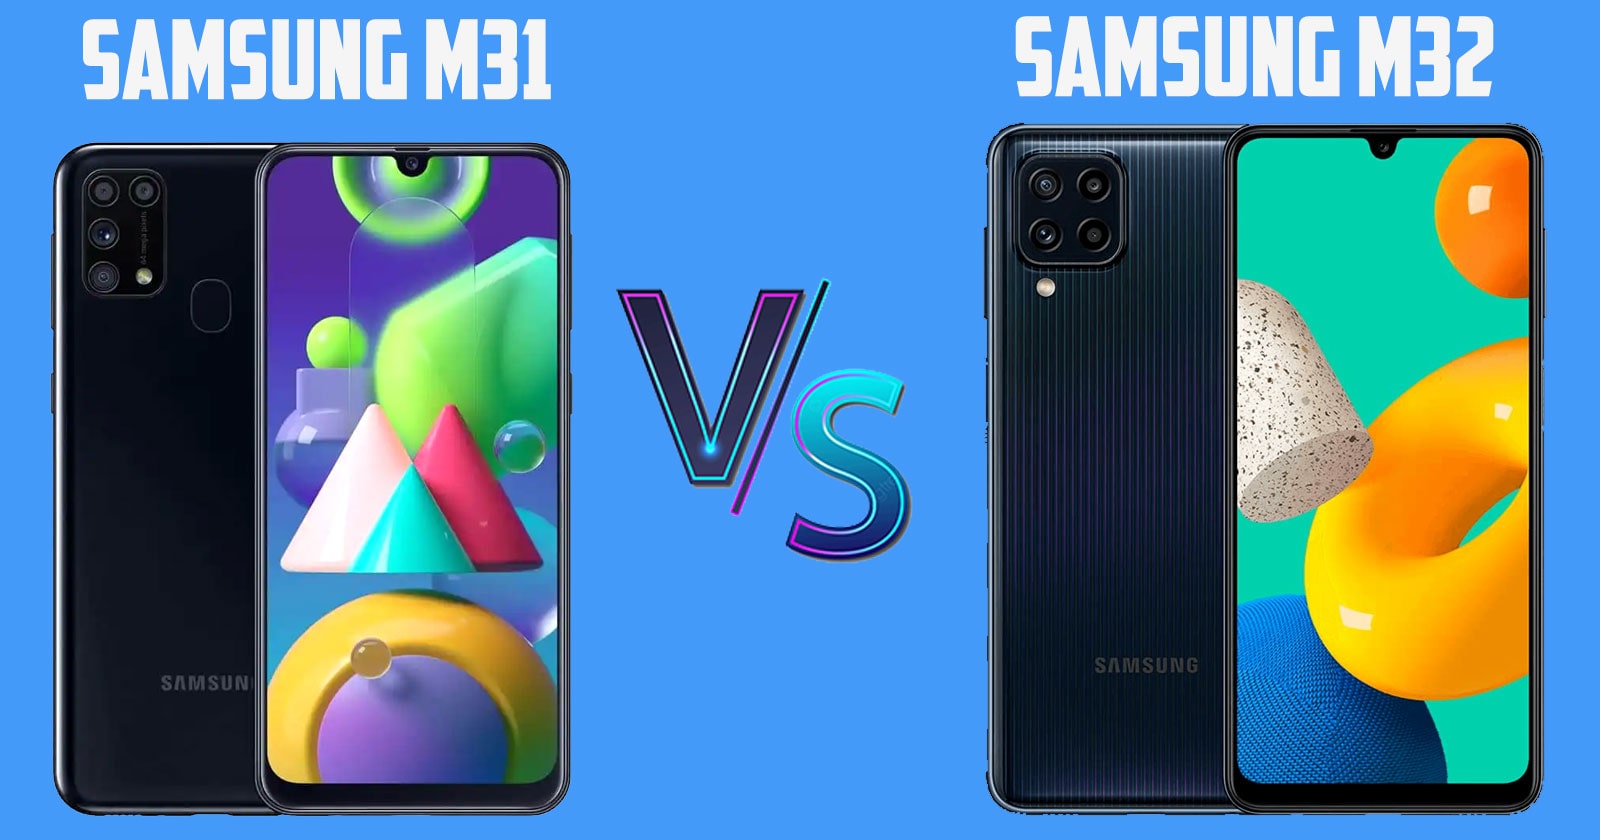 what is the difference between samsung m31 and m32?